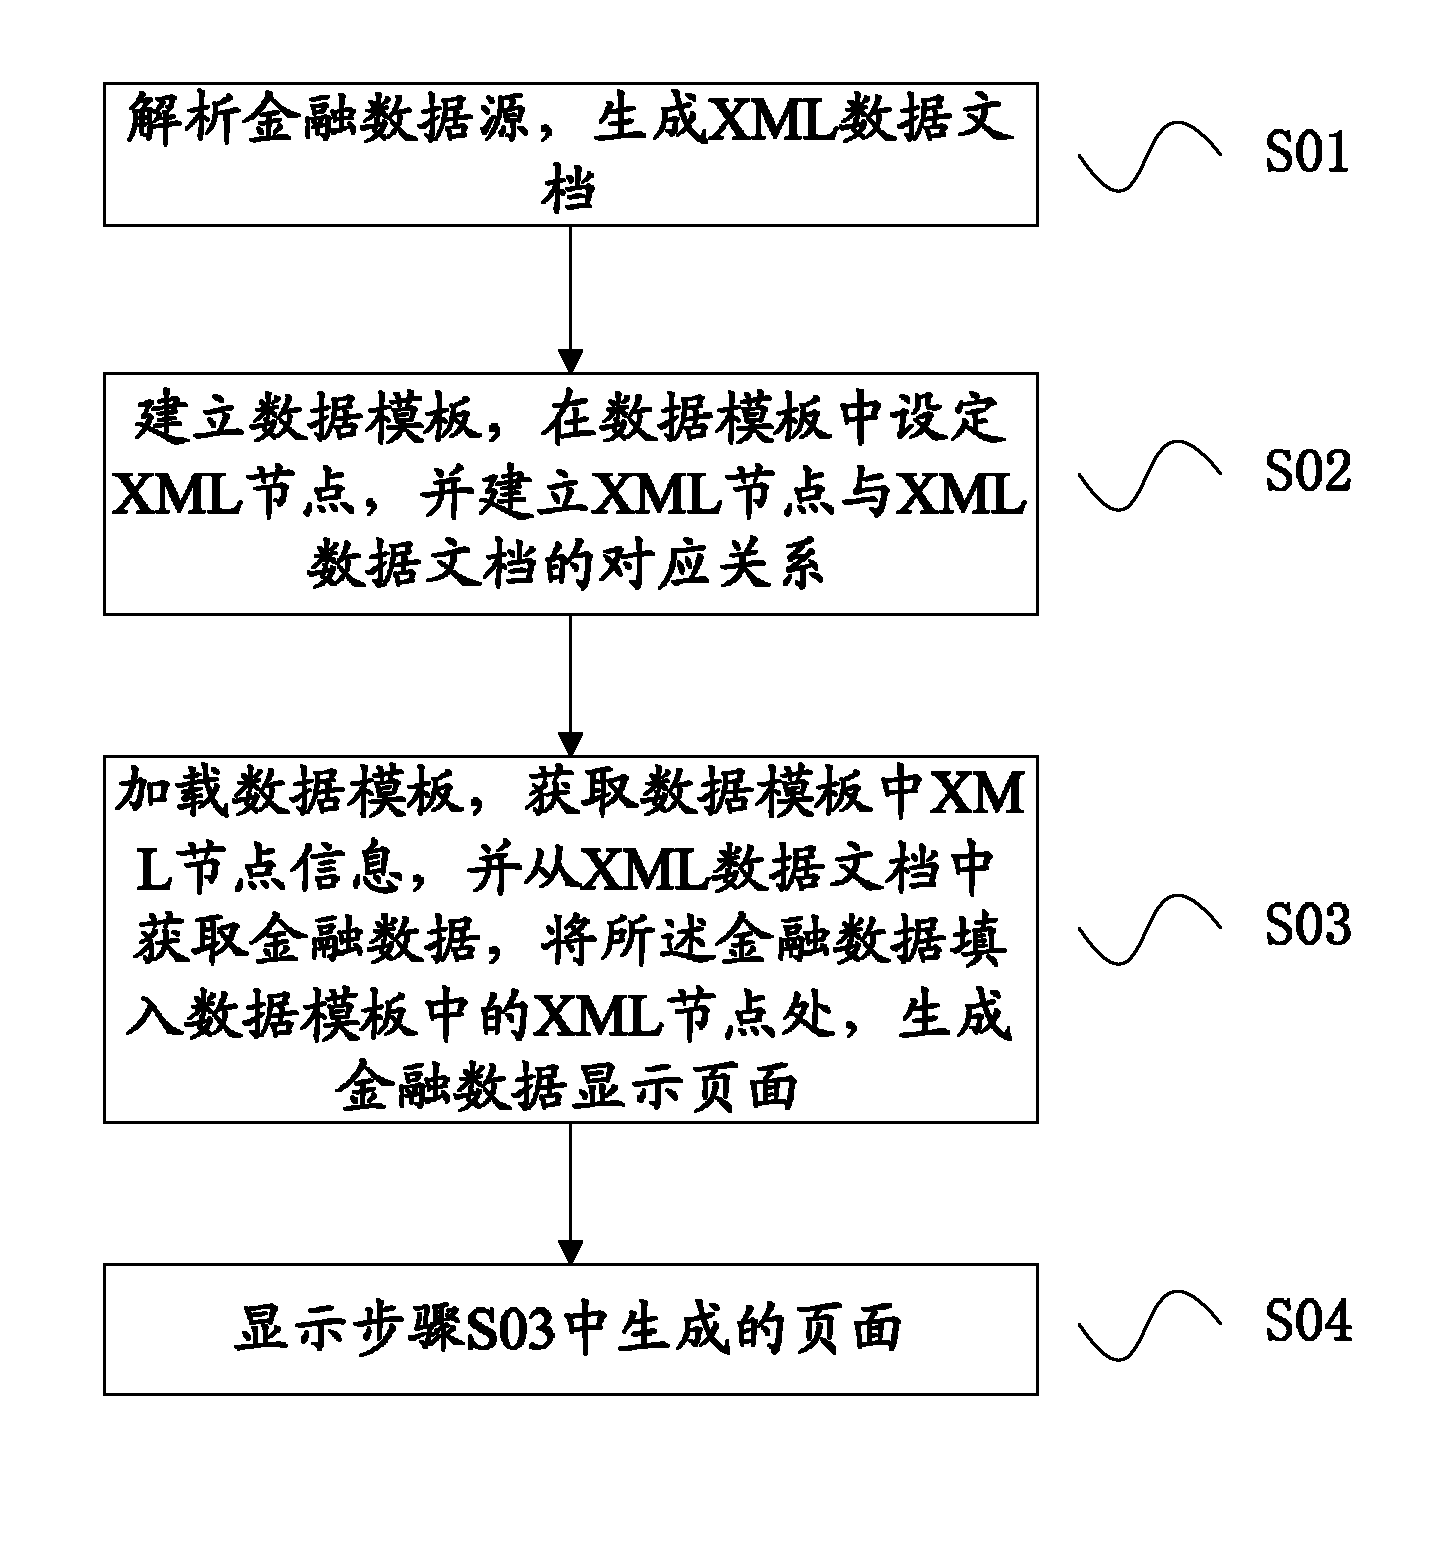 XML (extensible markup language)-based financial data display method and system